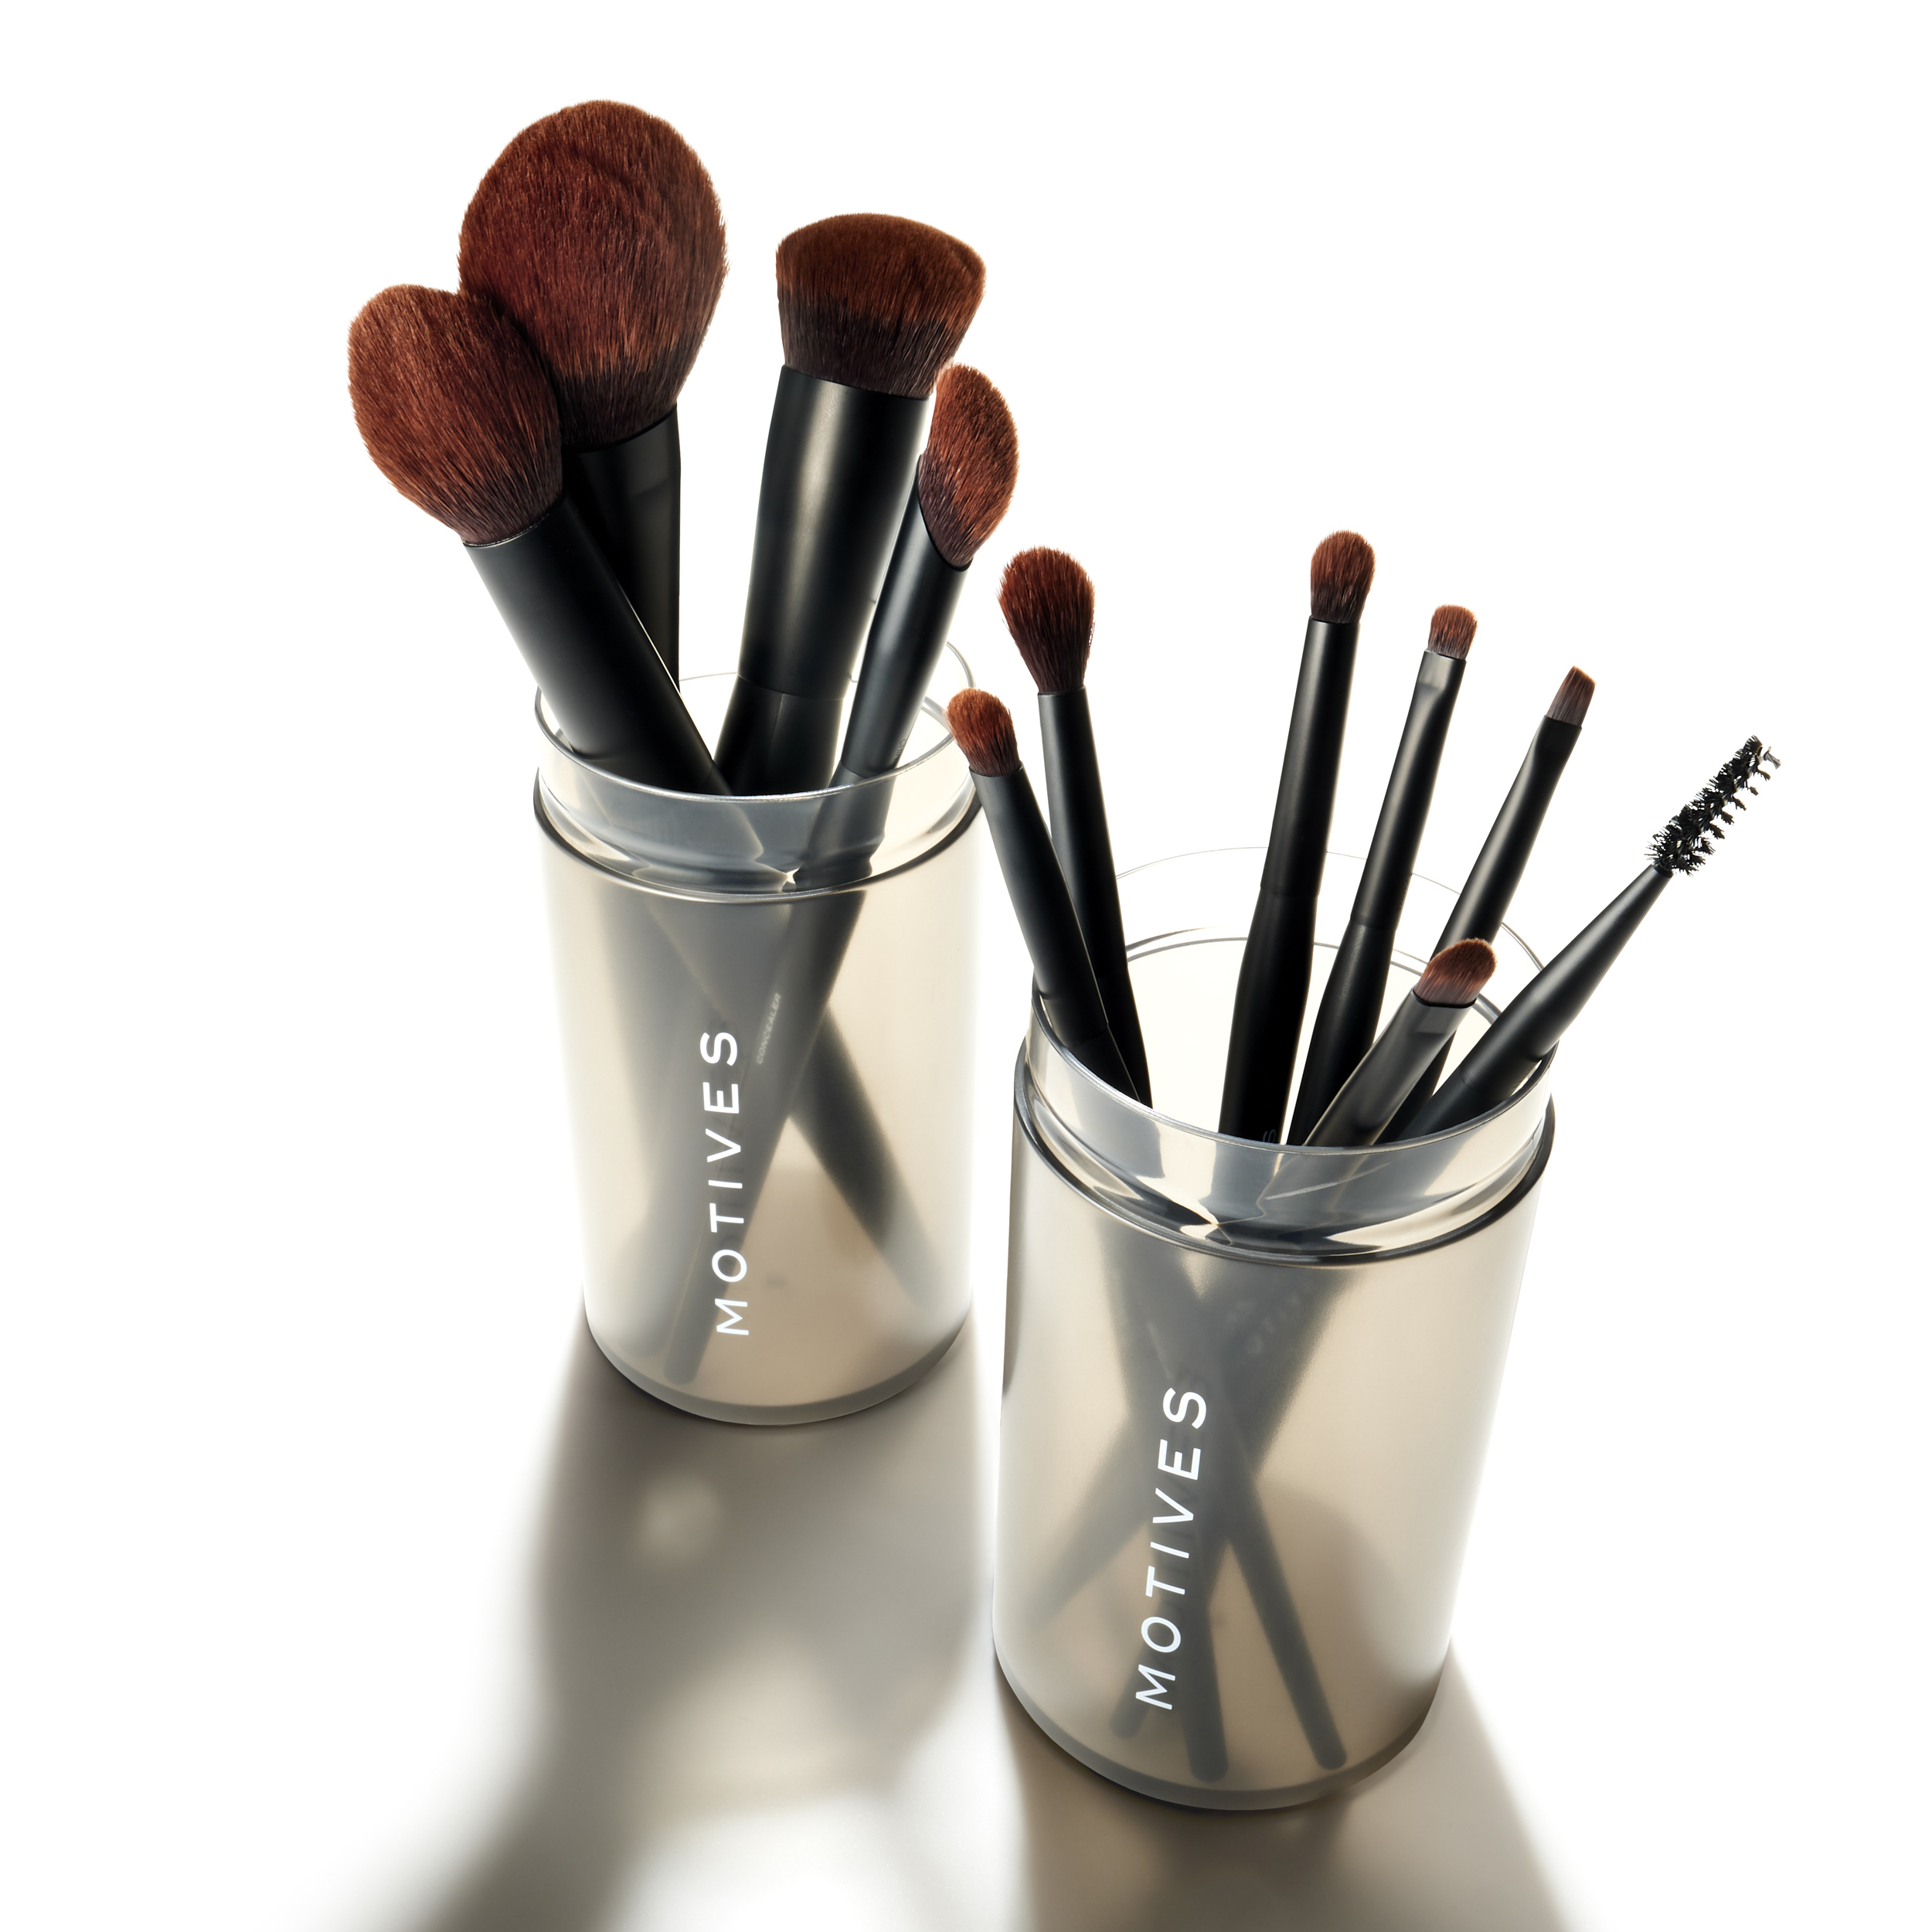 Motives Essential Brush Collections shown in storage case.